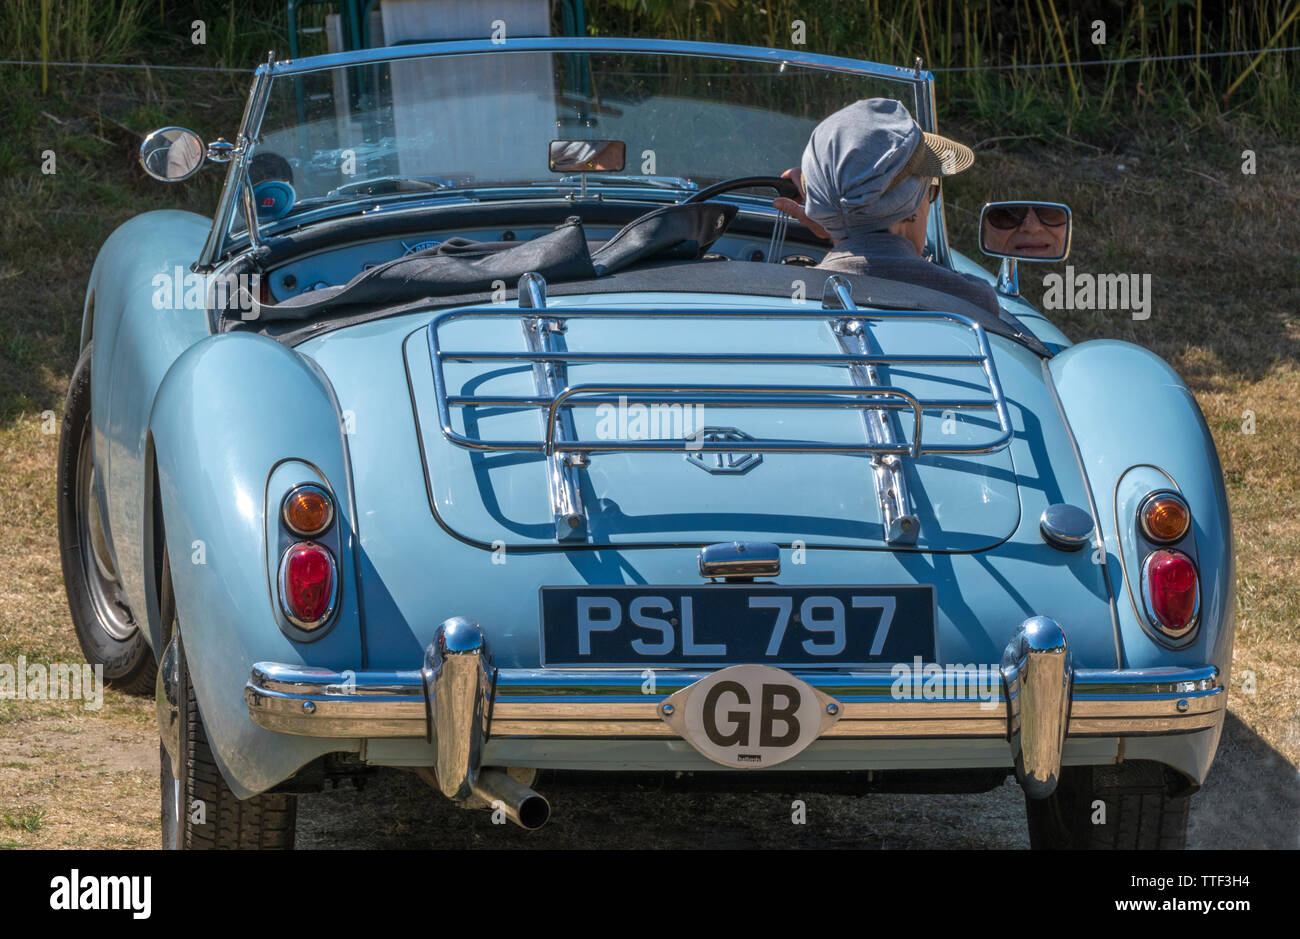 An elderly lady driver of a classic MGA, open top, British sports car, fully restored in pale blue paint, just about to drive off on a hot summer day. Stock Photo